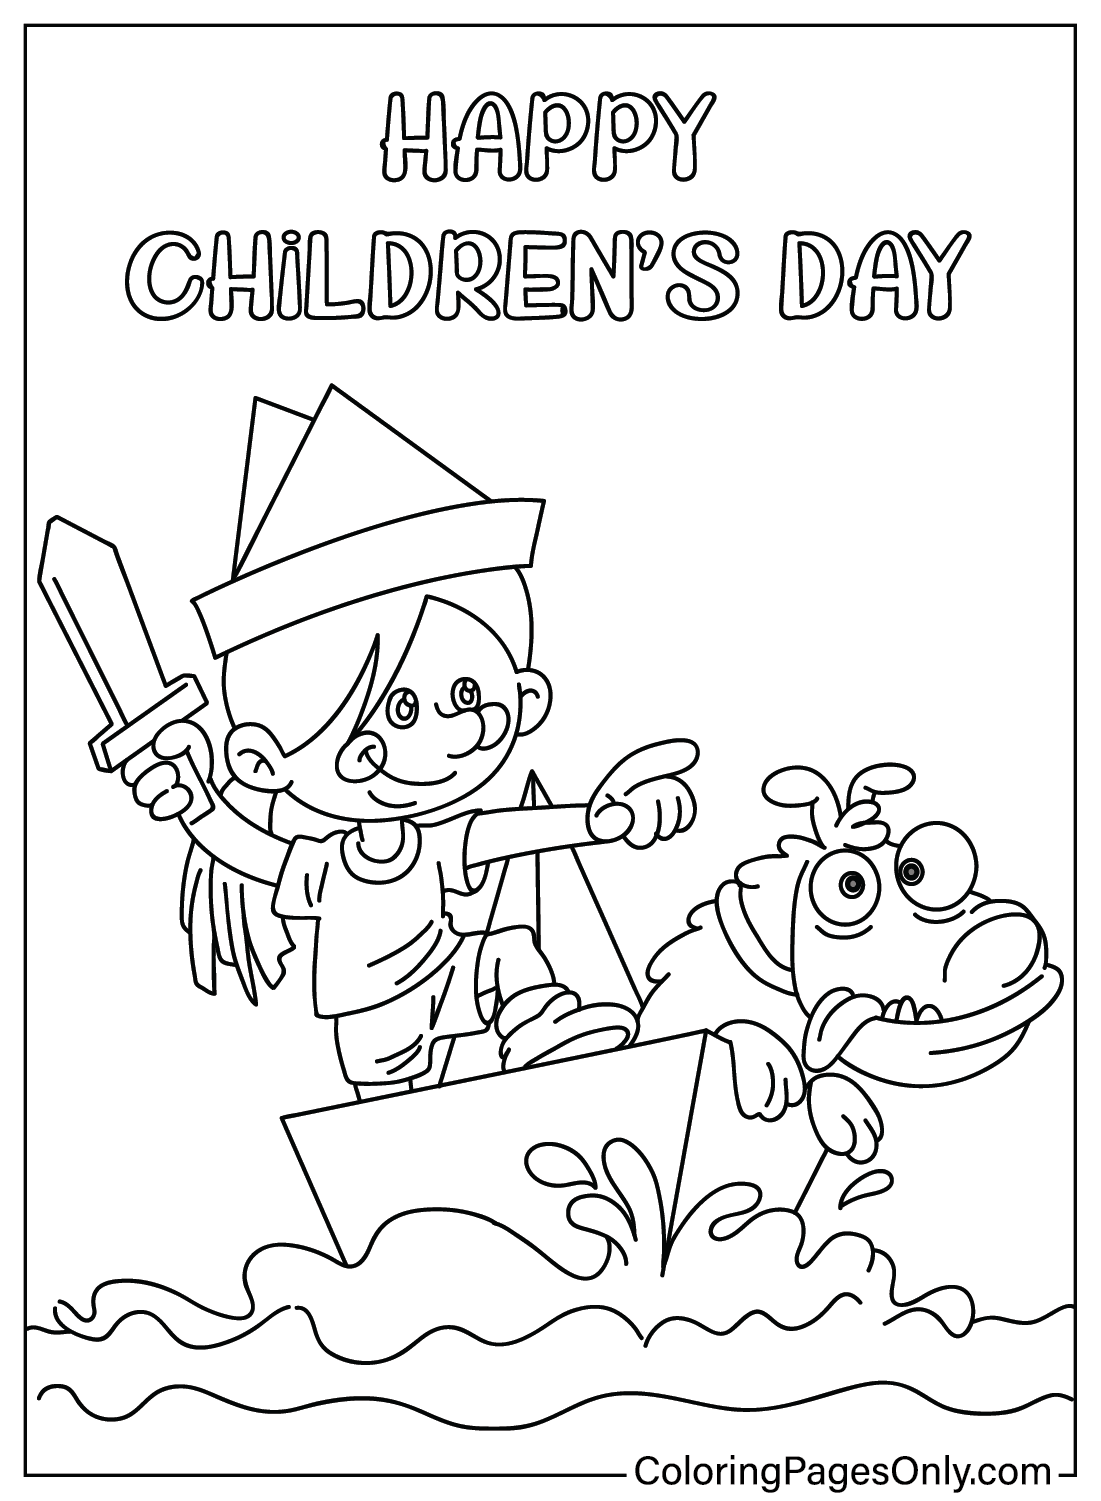 Coloring Page Happy Children’s Day